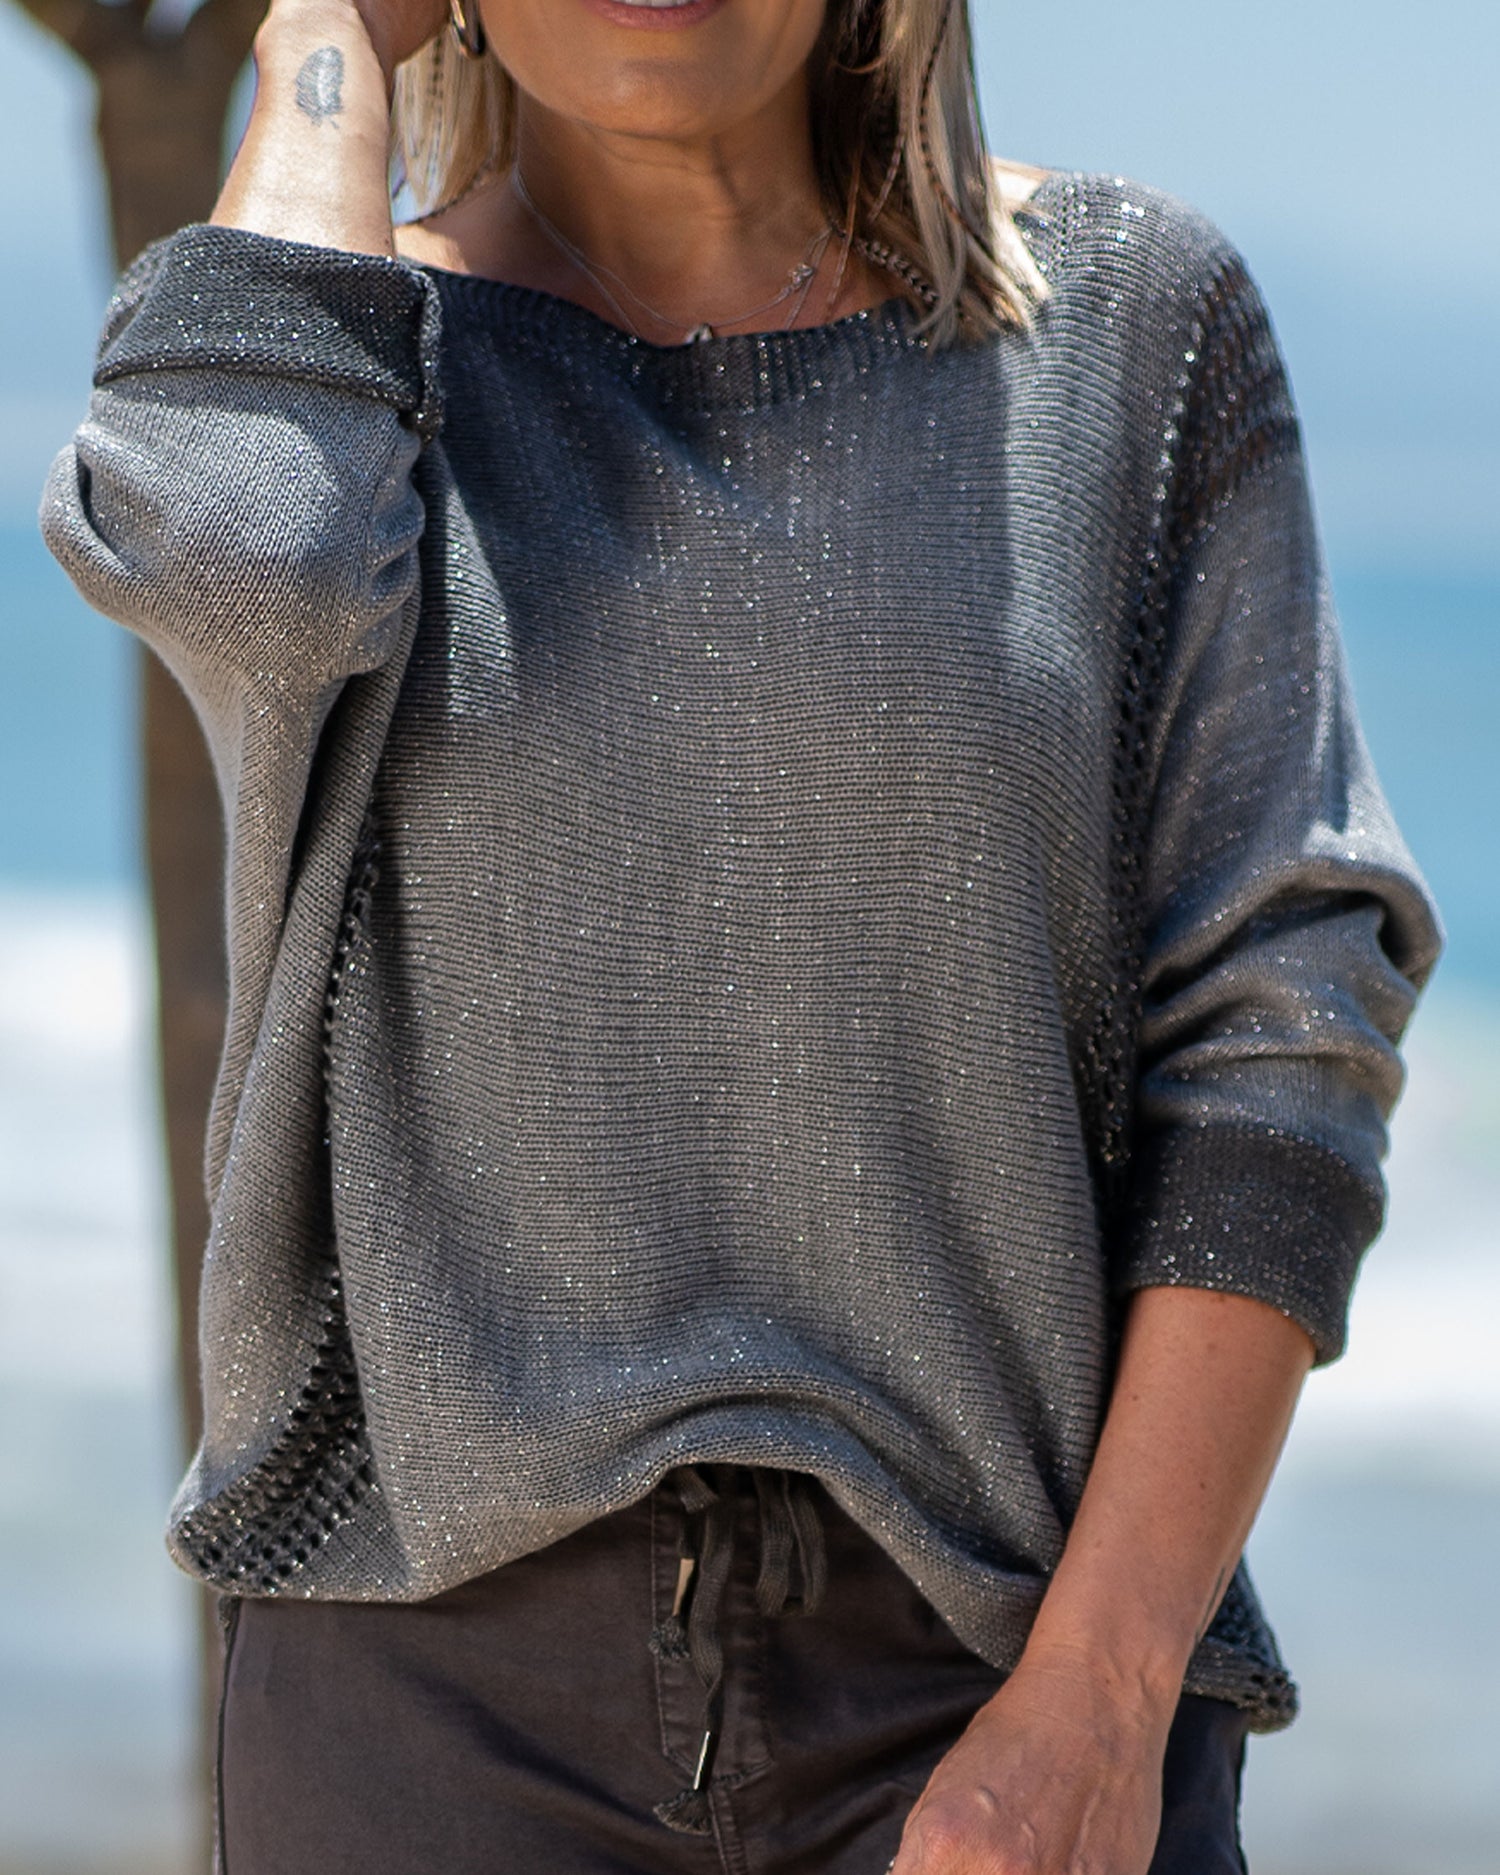 This knit features a playful infusion of glitter threads throughout, creating a shimmering effect. Batwing cut ensure ultimate comfort with a flattering overall fit. Ribbed side panels that not only enhance the overall fit but also provide a subtle texture contrast